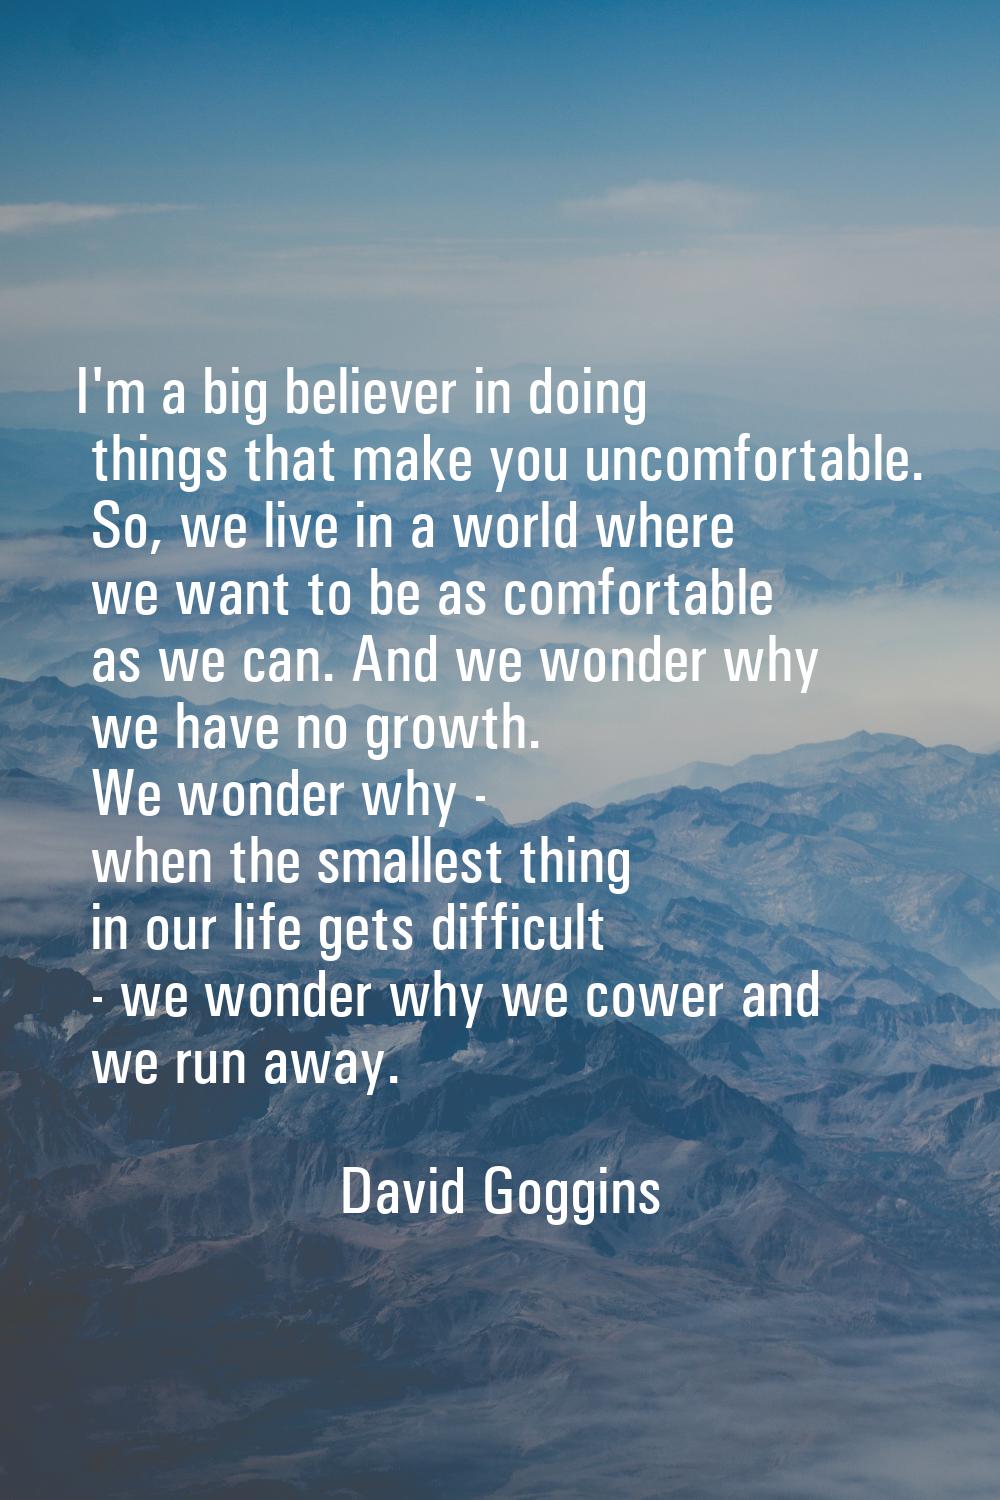 I'm a big believer in doing things that make you uncomfortable. So, we live in a world where we wan